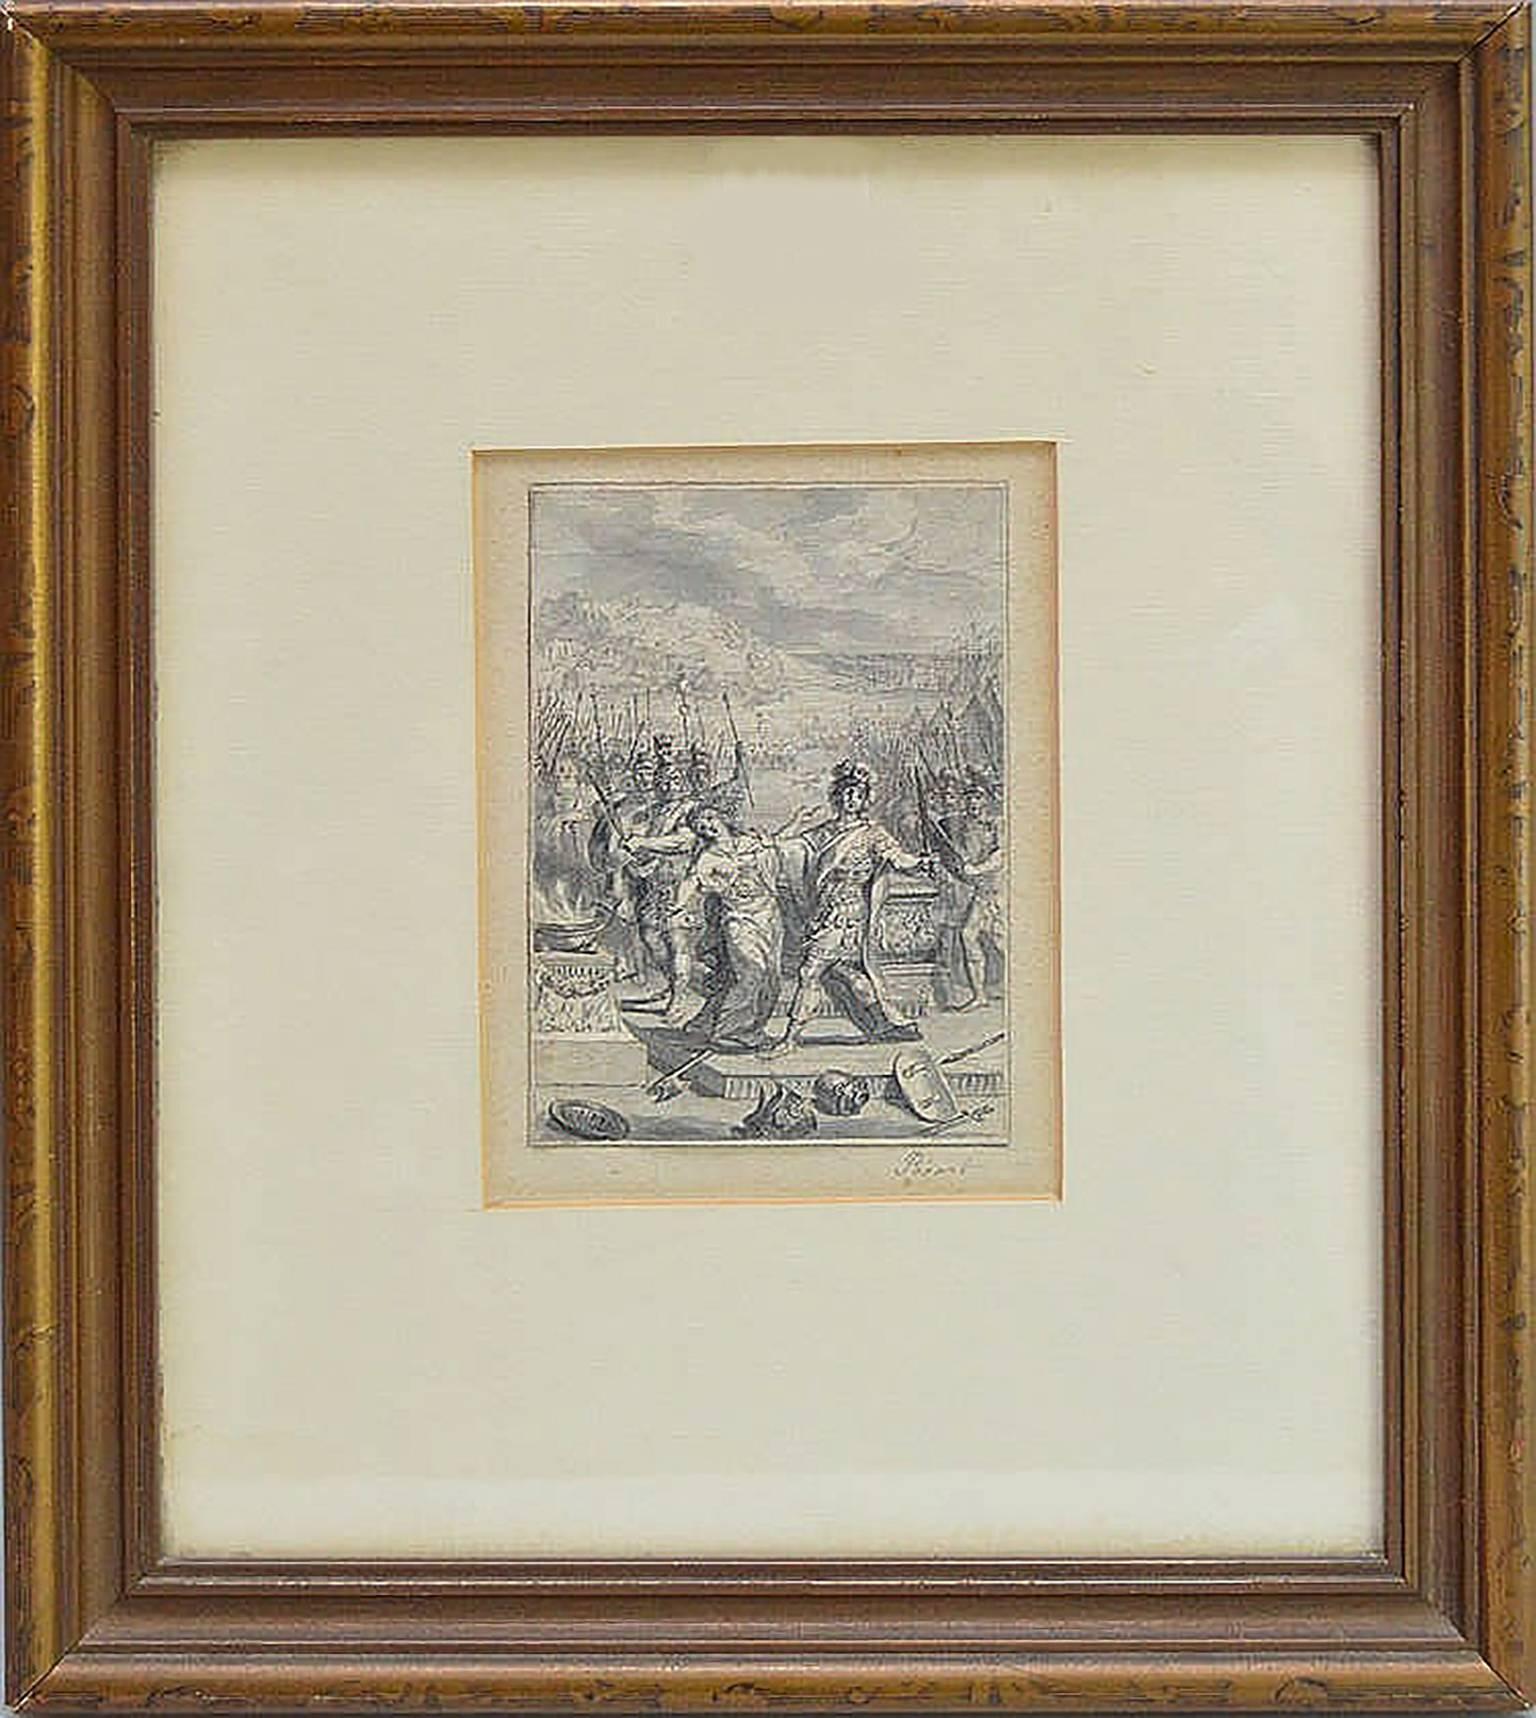 Drawing by French Master Bernard Picart (FRENCH, 1673-1733)  Circa 1720  Old Master Pen & Ink Drawing with Wash on Laid Paper  Hand Signed by Picart in lower left of Image  Dimensions: Image 5″ x 3.5″  Bernard Picart (11 June 1673 – 8 May 1733) was